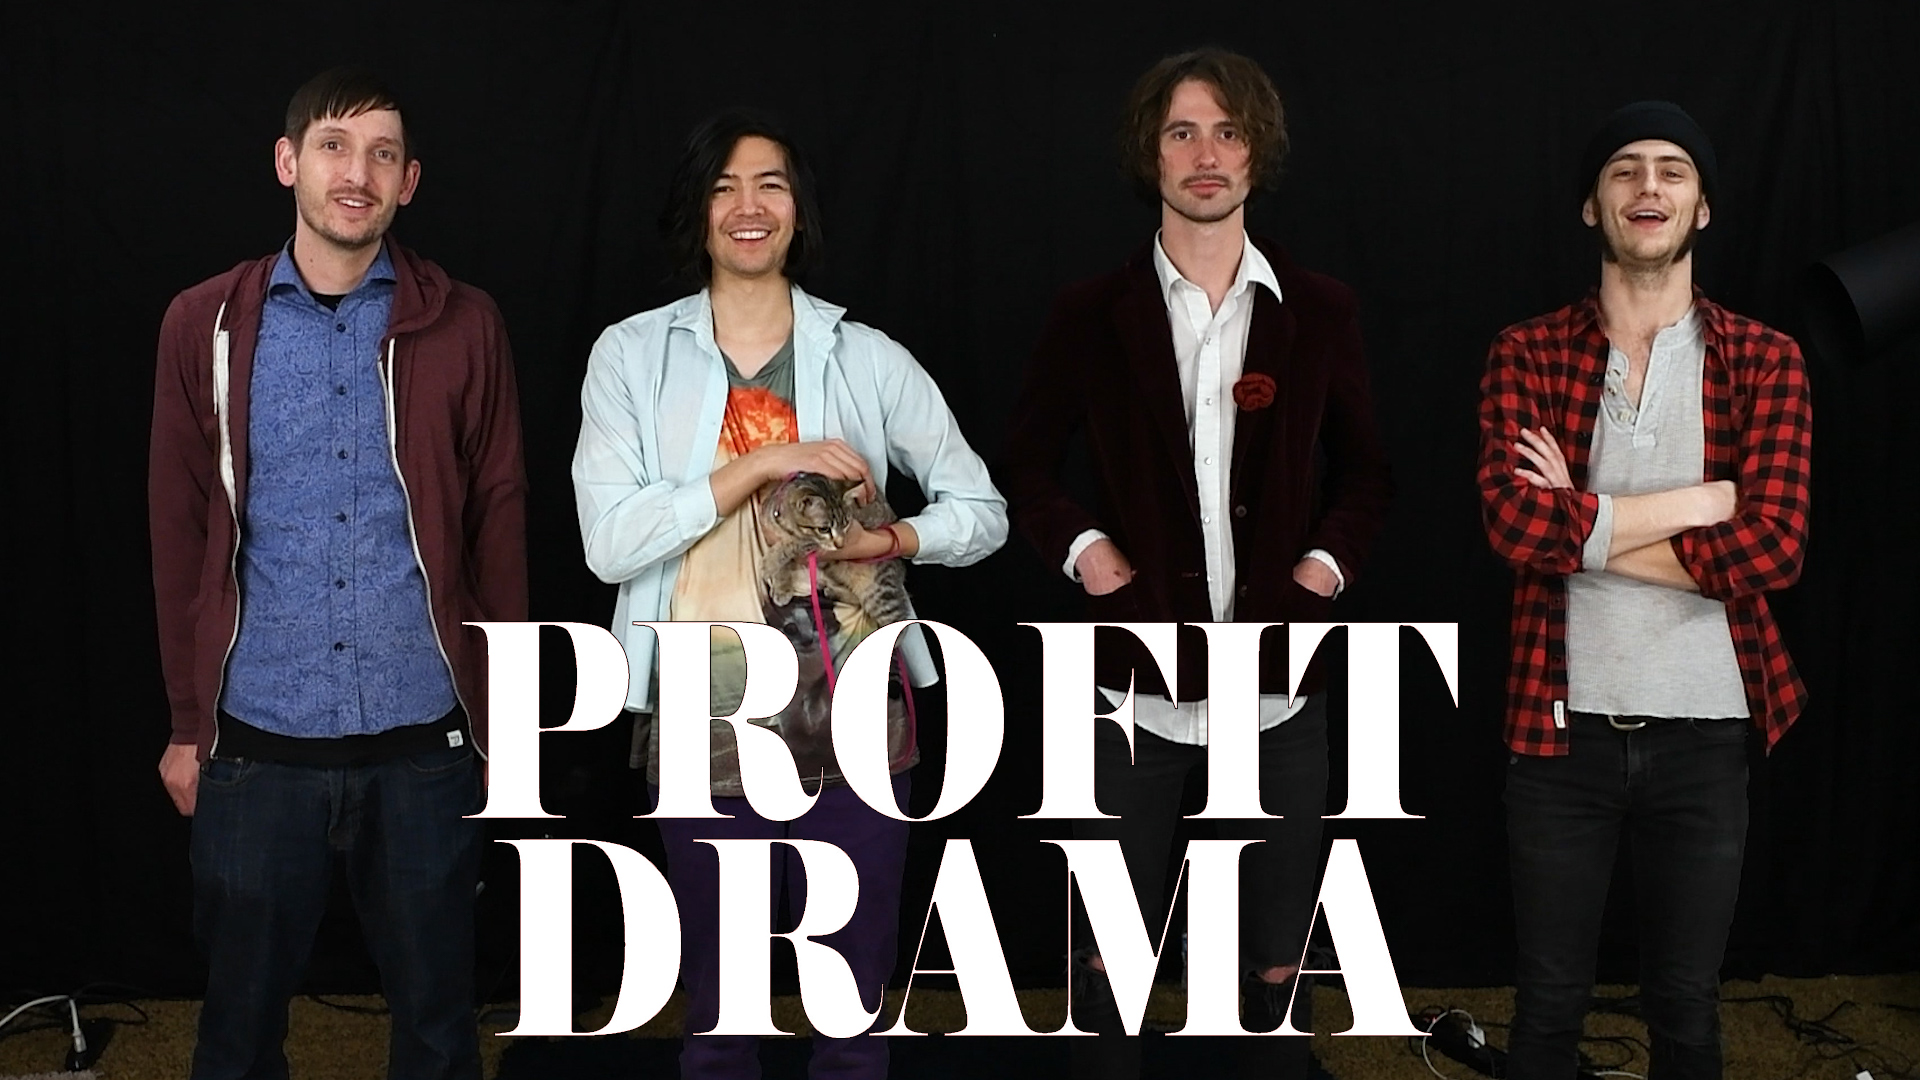 Part 1: Profit Drama Sits Down With Rose City Review to discuss a Tik Tok album and music daycare